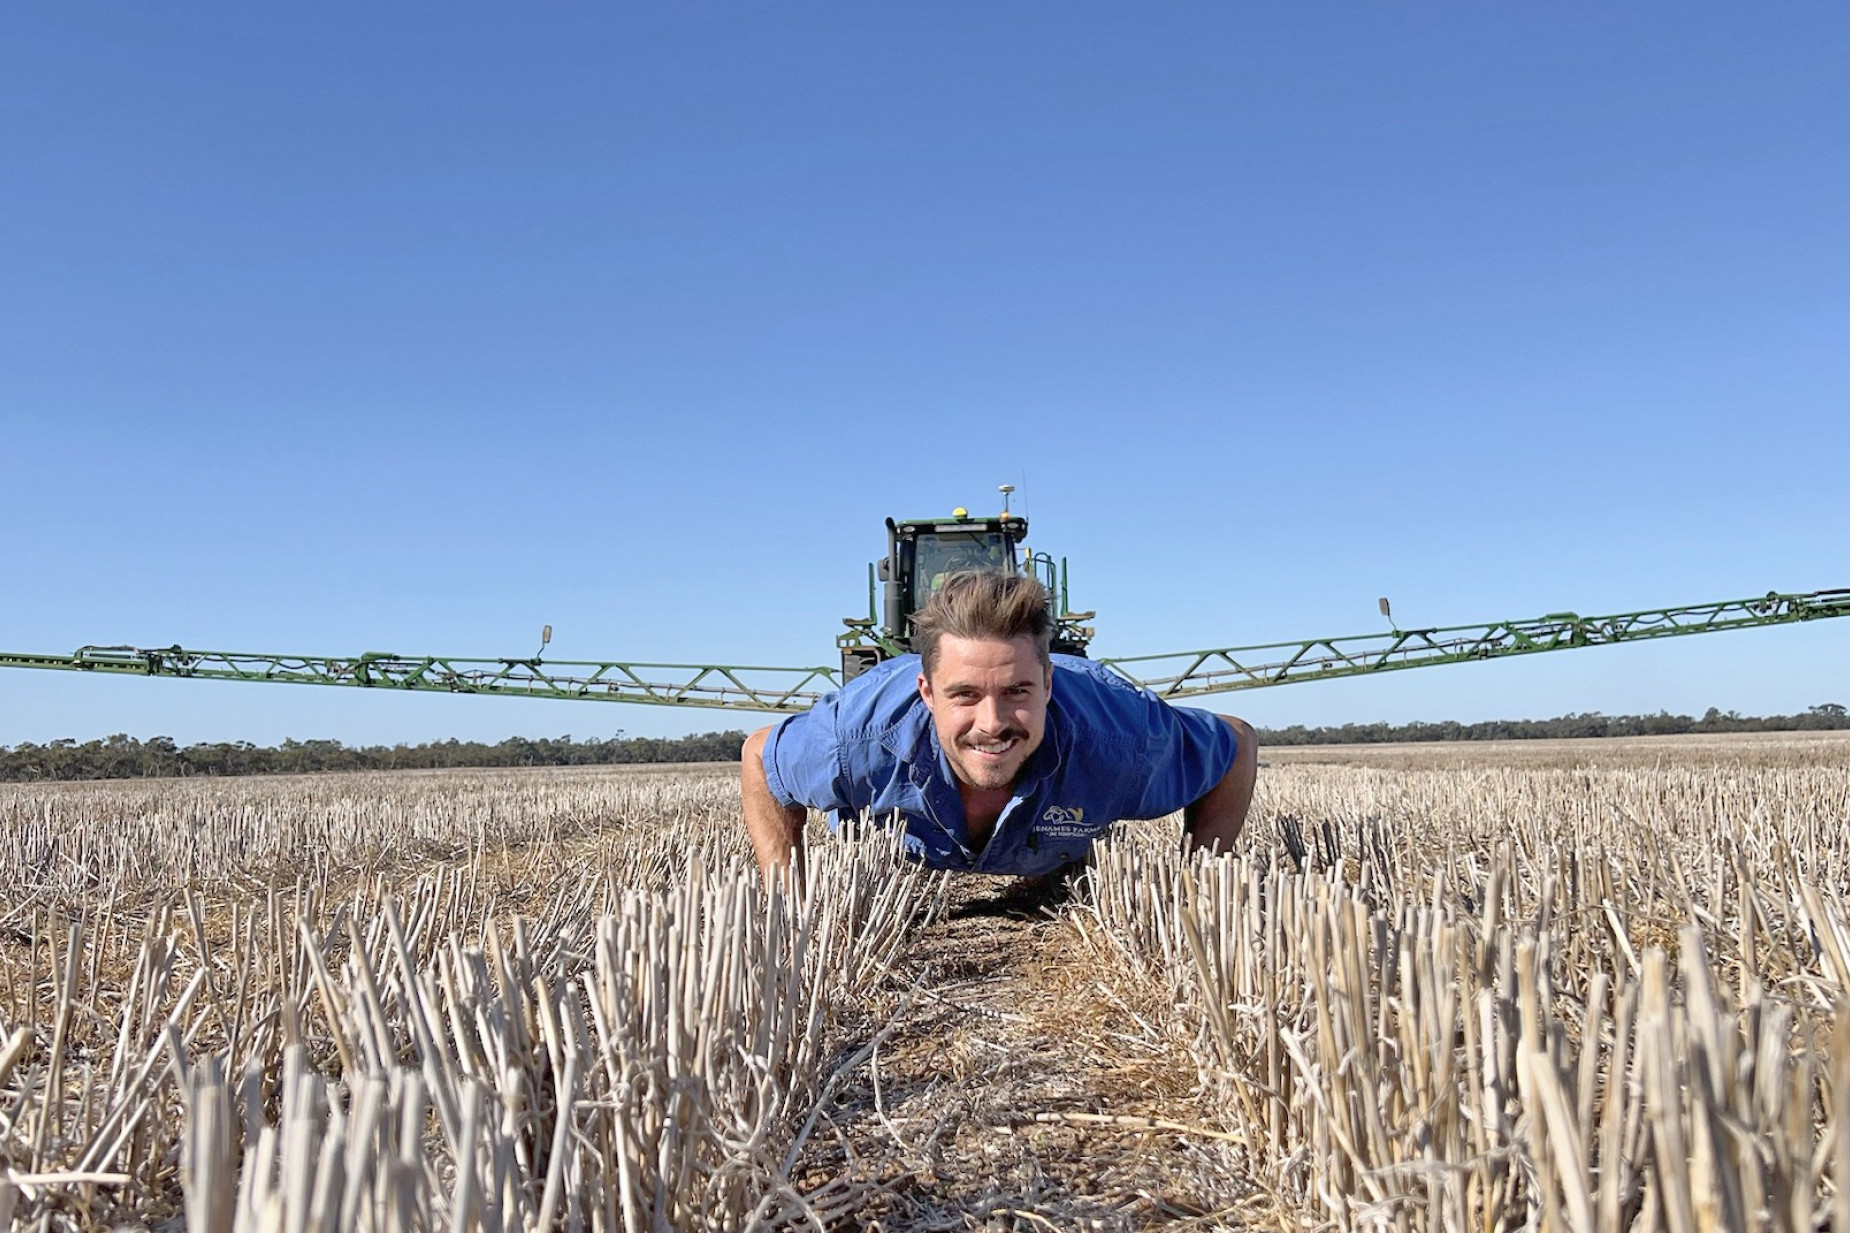 Will Simpson is encouraging his fellow farmers to speak openly about mental health issues.